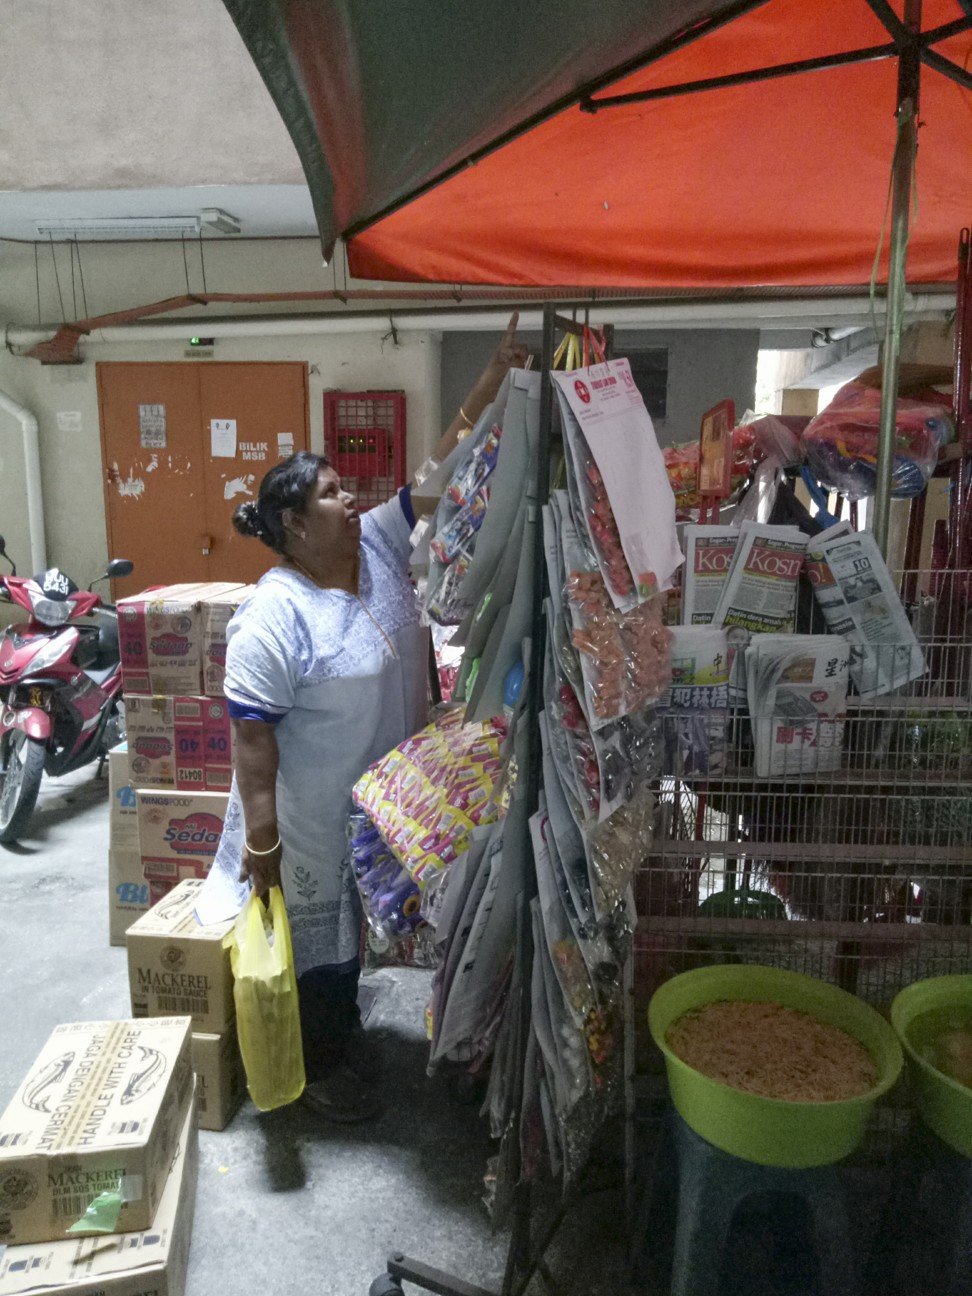 Minachi Munianday, 48, owns a grocery store on the ground floor of a high-rise public housing compound in Setapak, Kuala Lumpur. Photo: T.K. Letchumy Tamboo